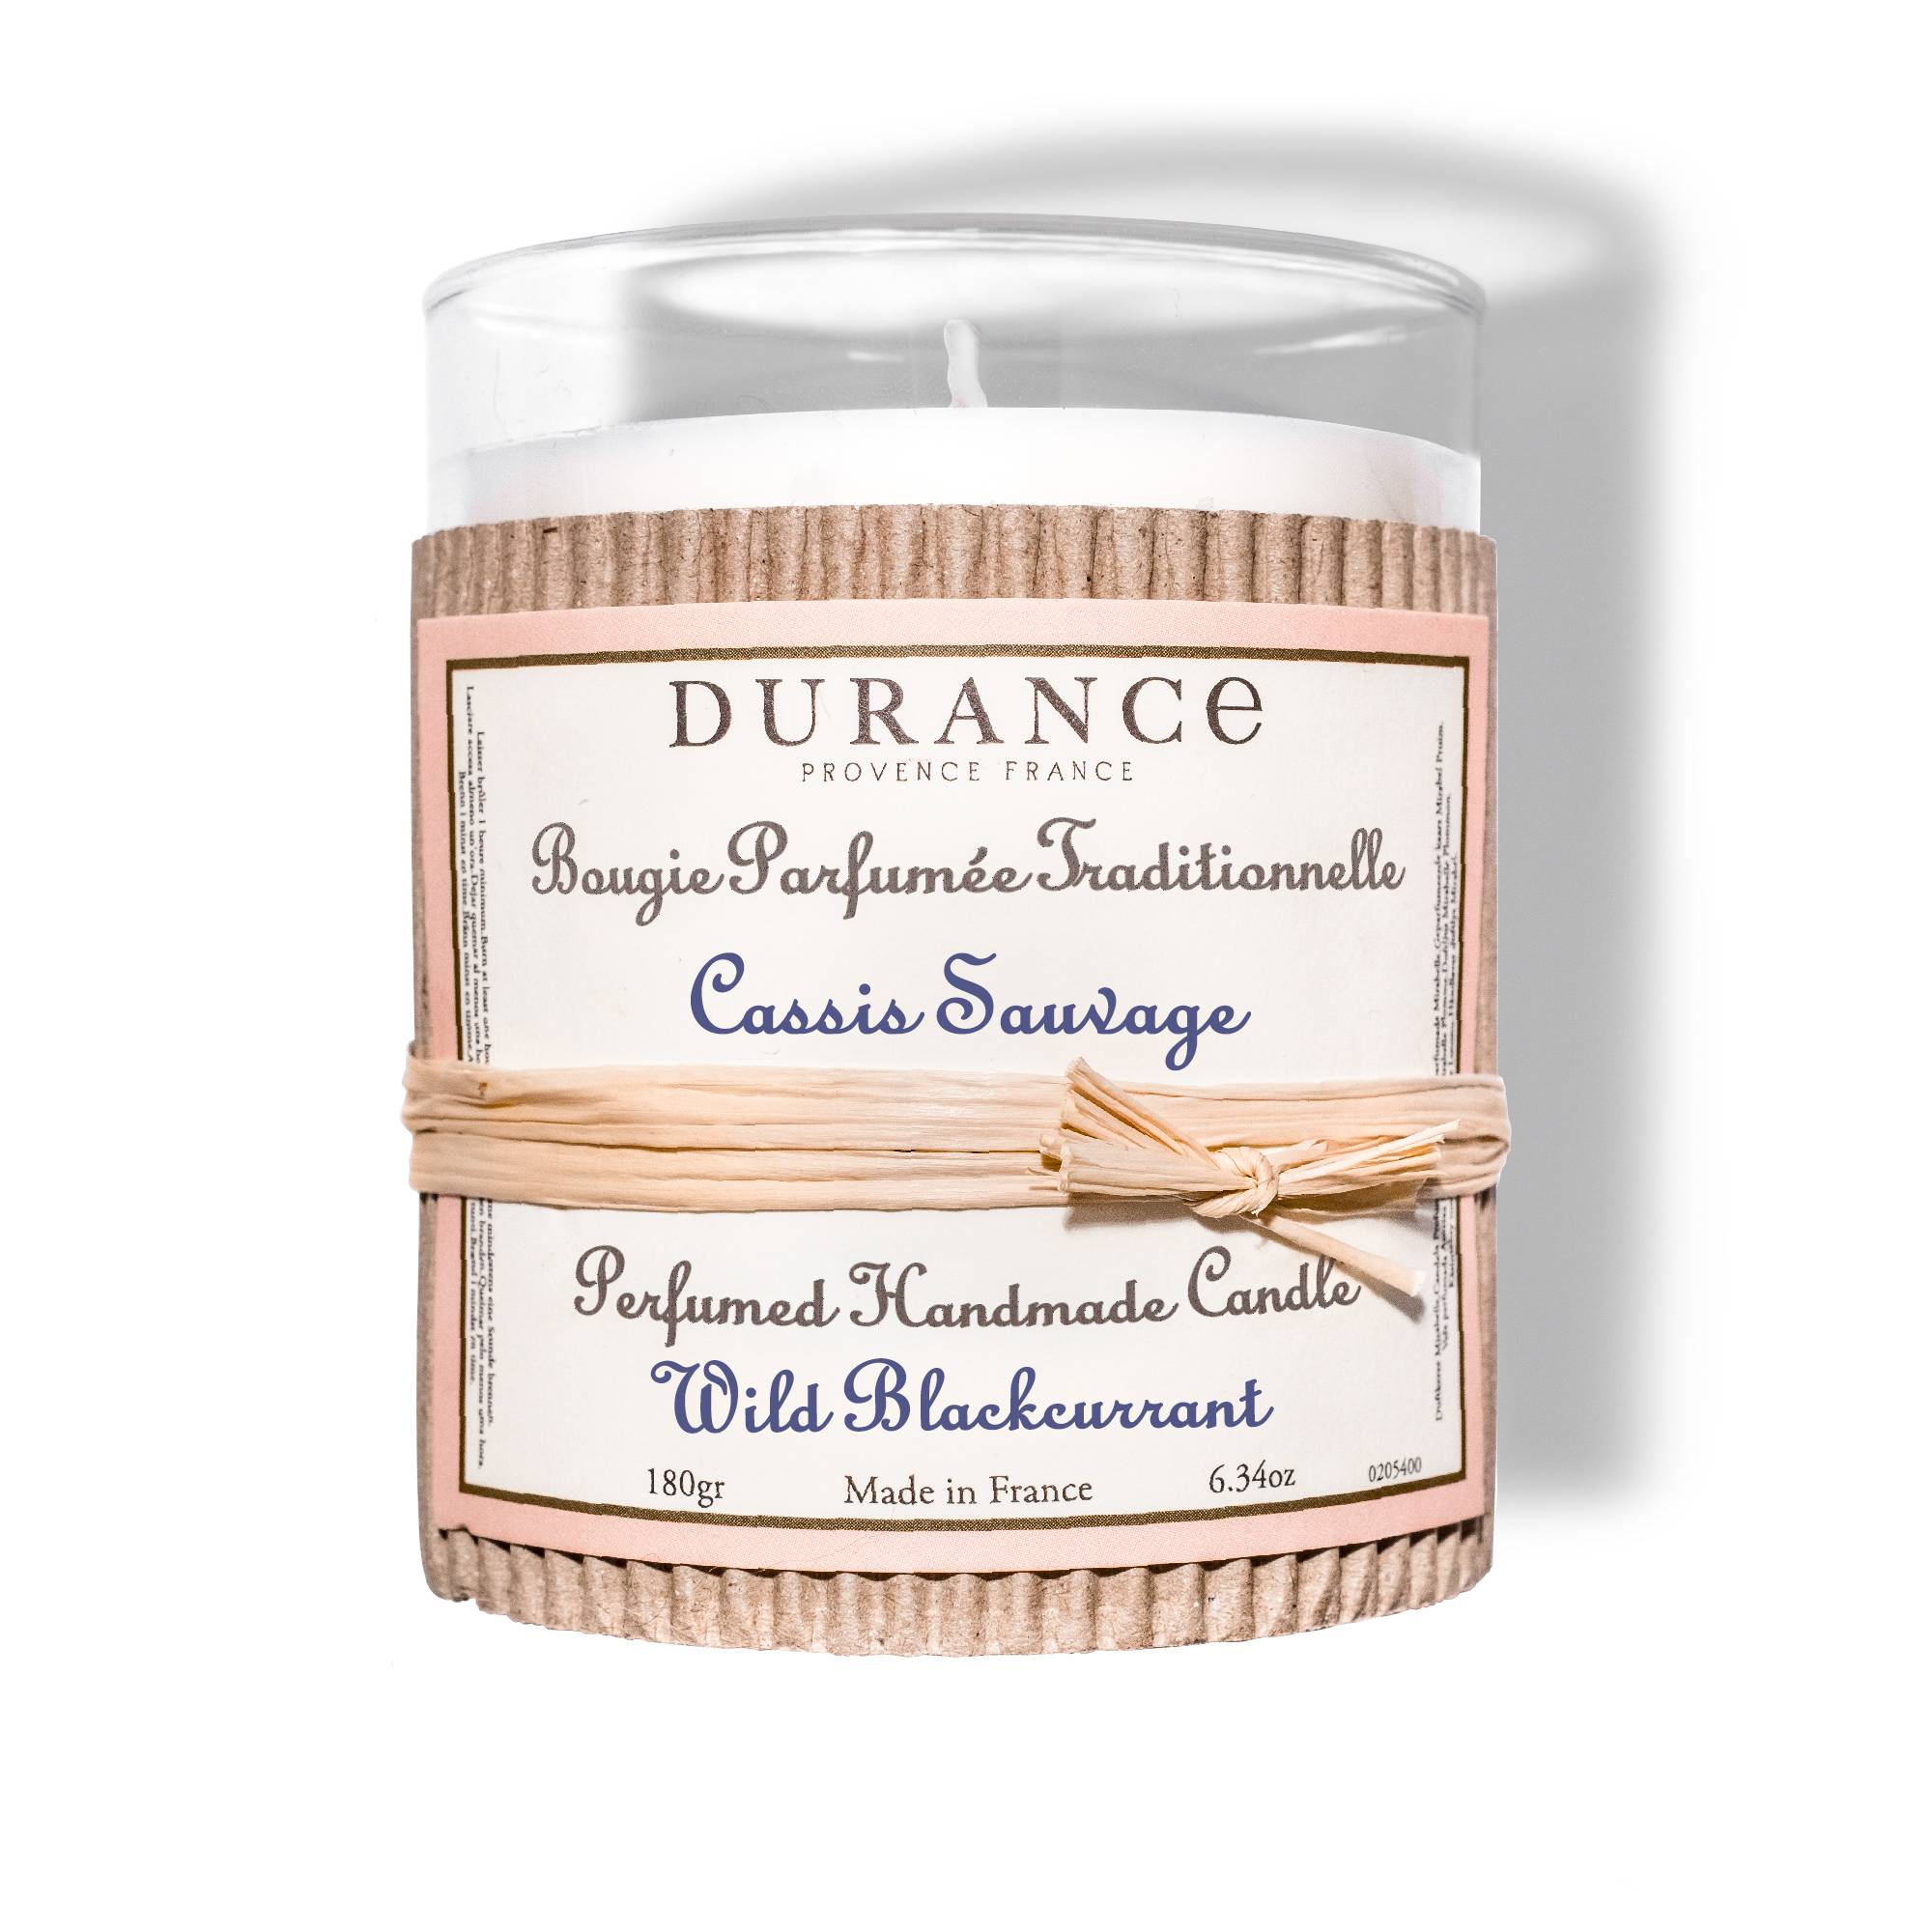 Bougie traditionnelle cassis sauvage 180g - Durance